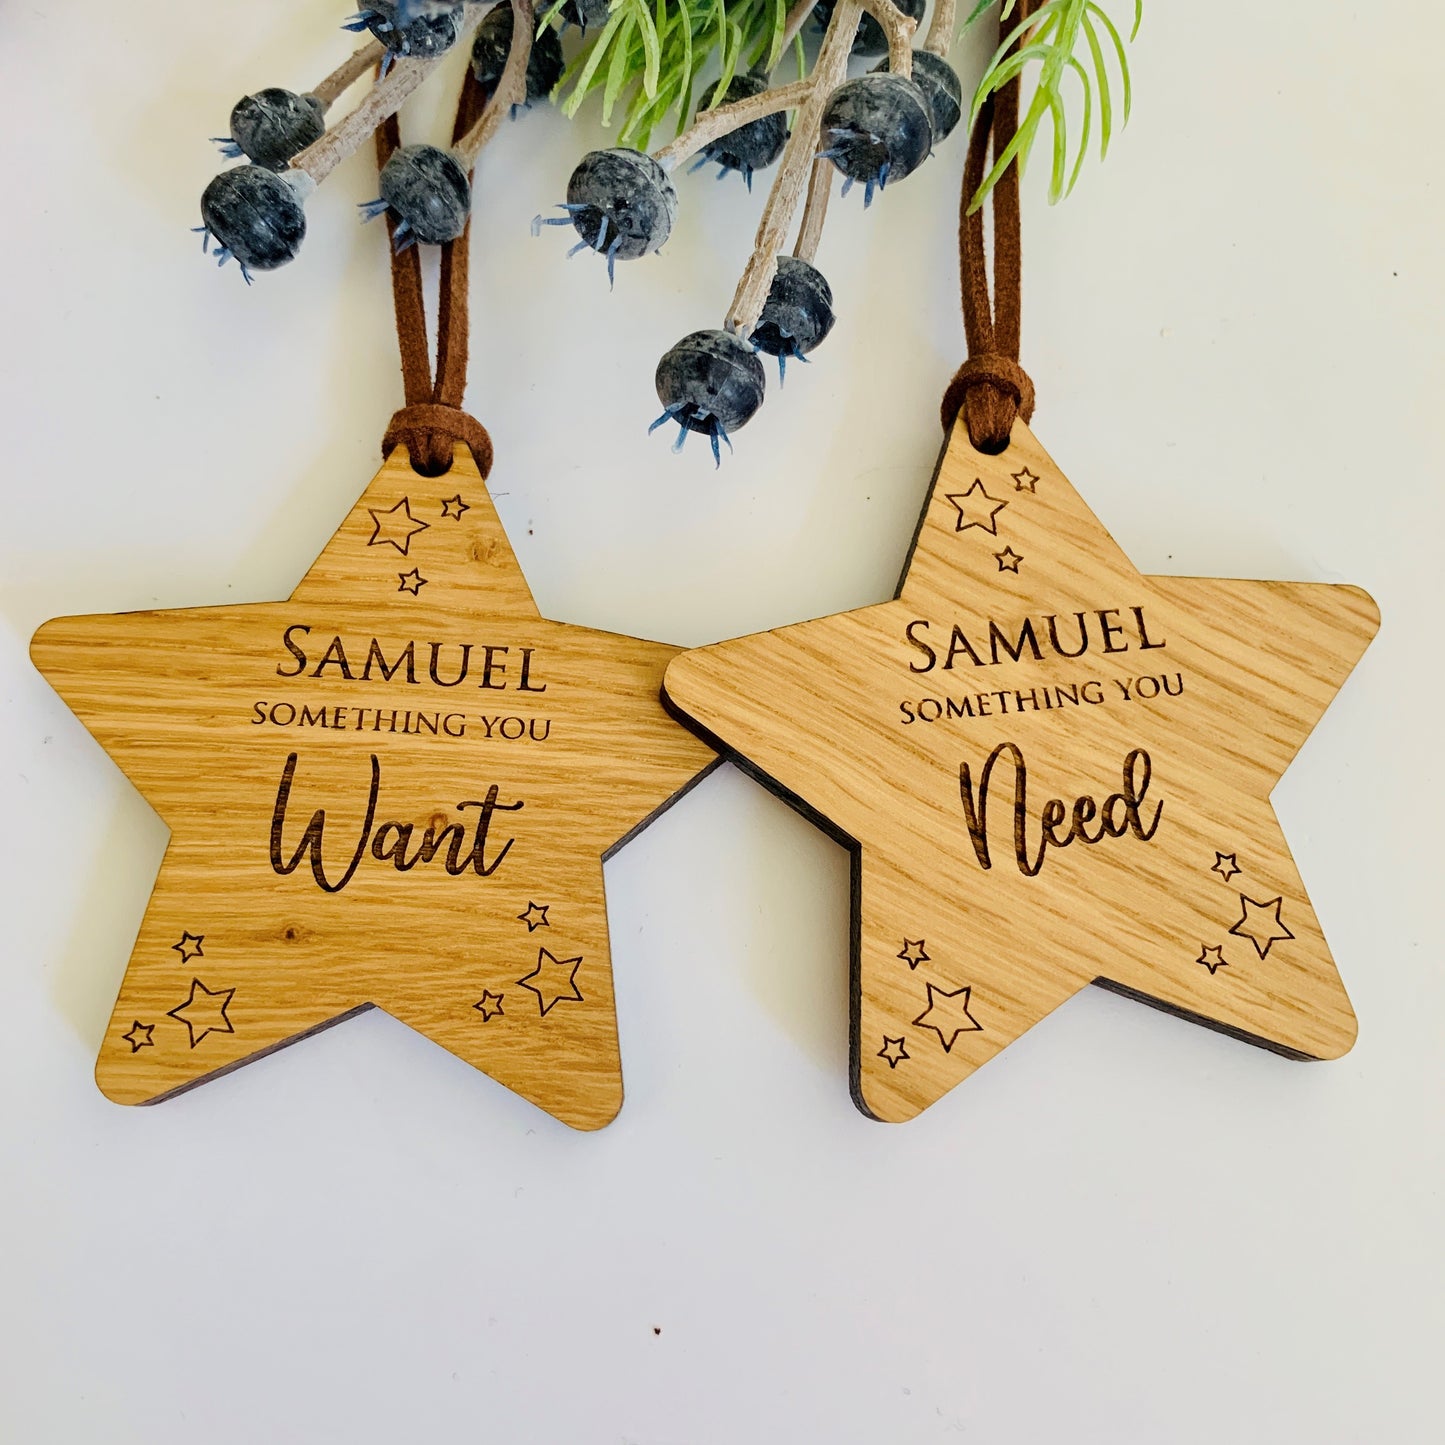 Personalised Something you Want, Need, Wear, Read and Share gift tags